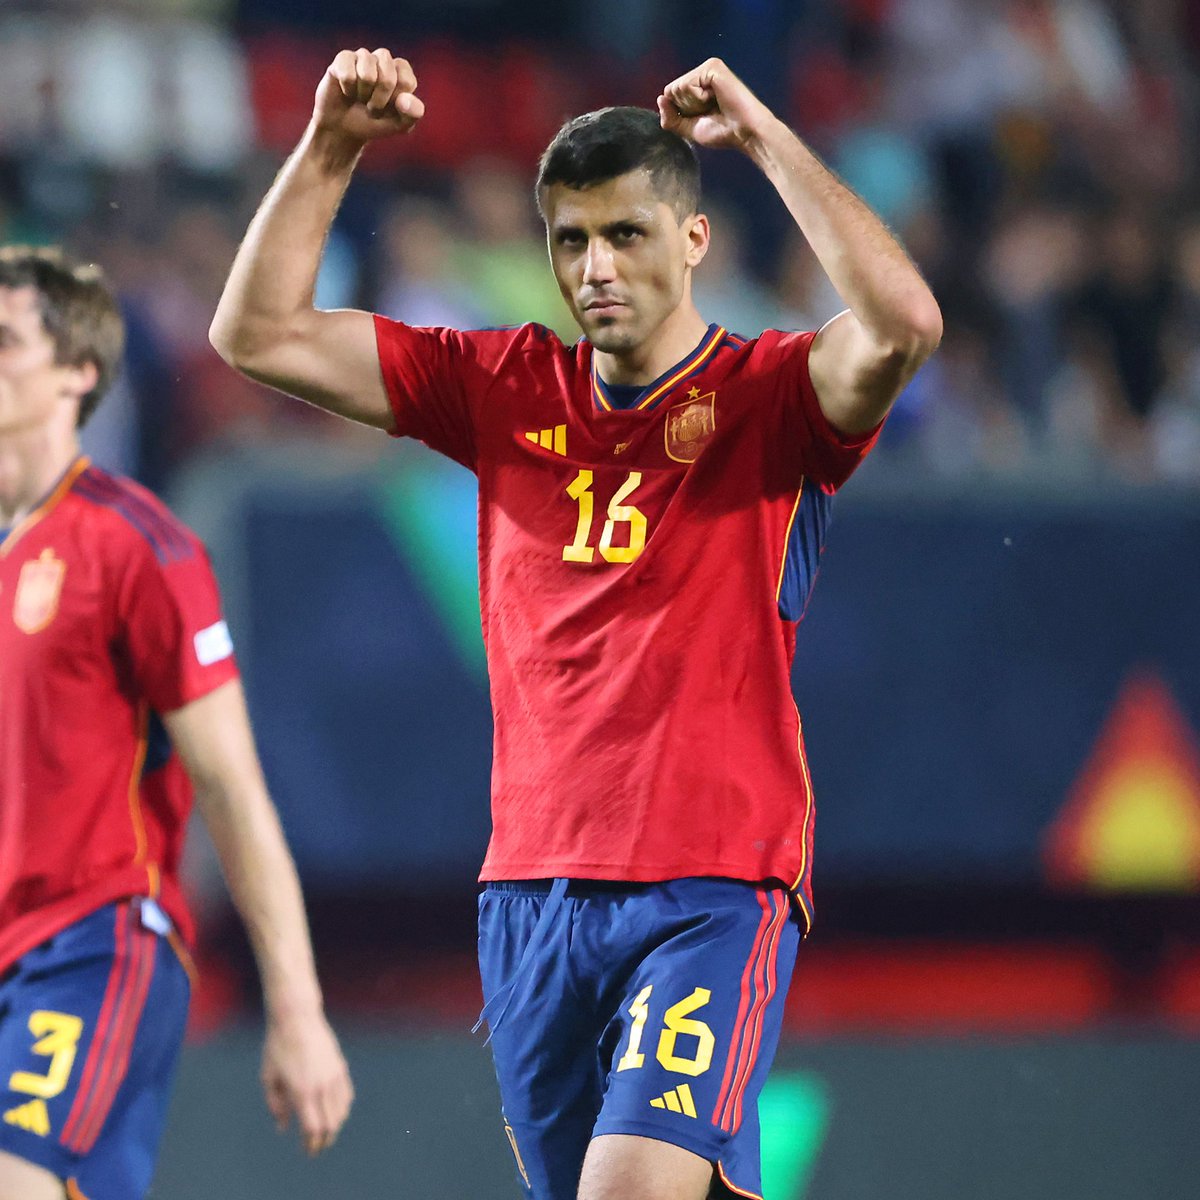 Congratulations to Aymeric @Laporte and Rodri on being crowned 2023 #NationsLeague 𝗖𝗛𝗔𝗠𝗣𝗜𝗢𝗡𝗦 with Spain! 🇪🇸🏆